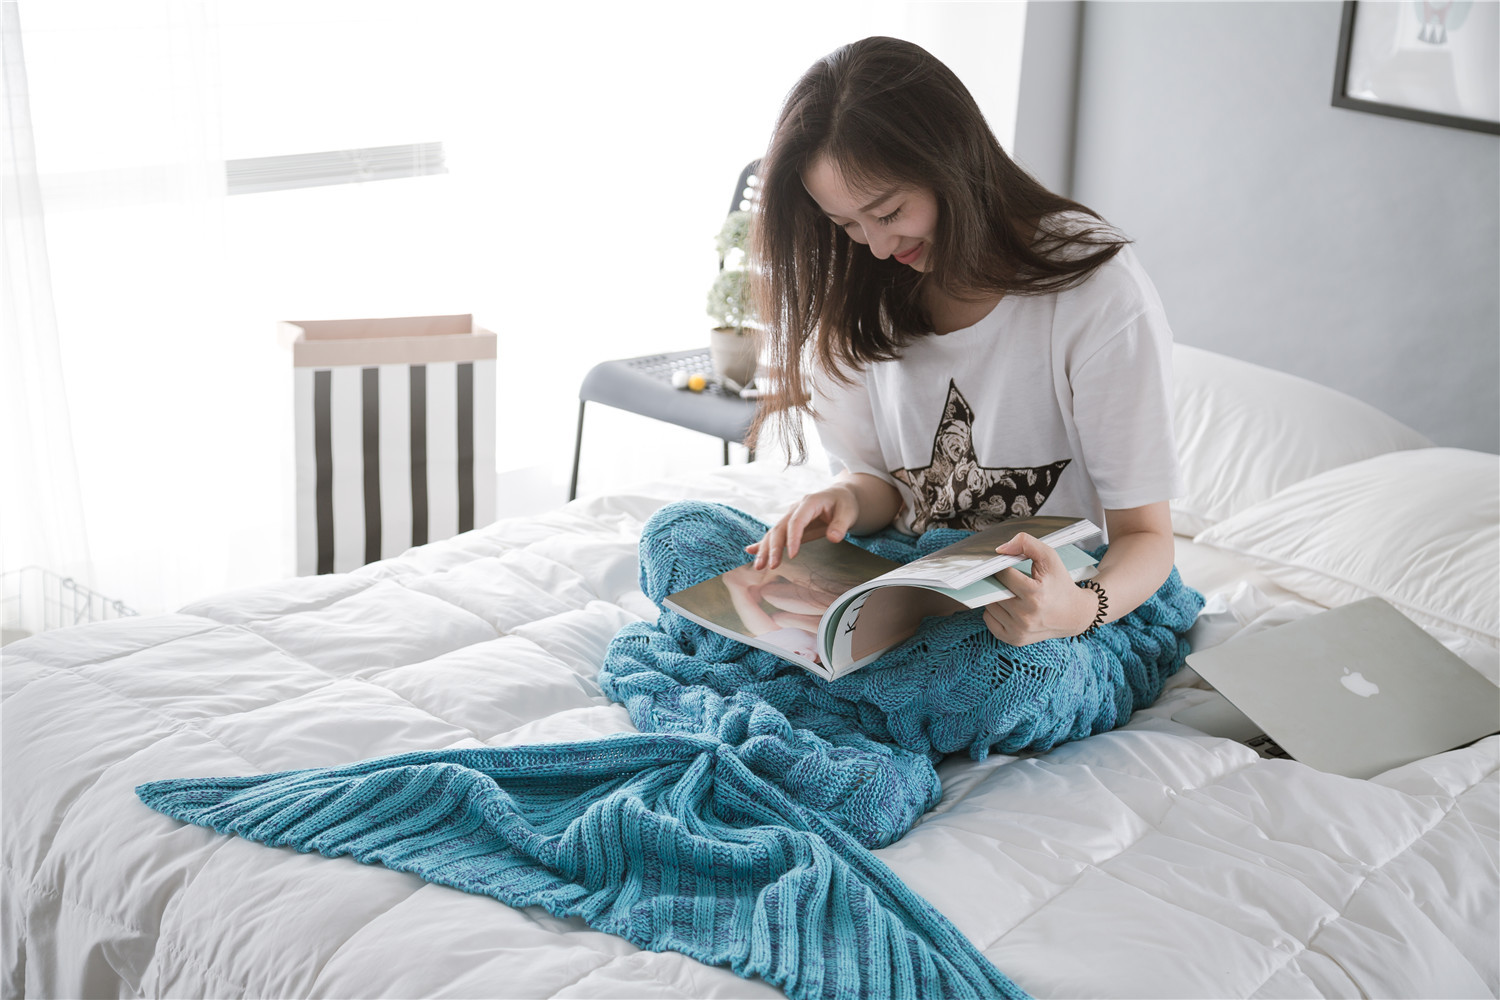 Classic Pattern with Lace 55.1 x 27.6, 140 x 70cm, Green Handmade Mermaid Tail Blanket Ecrazybaby888 All Seasons Warm Knitted Bed Blanket Sofa Quilt Living Room Sleeping Bag for Kids